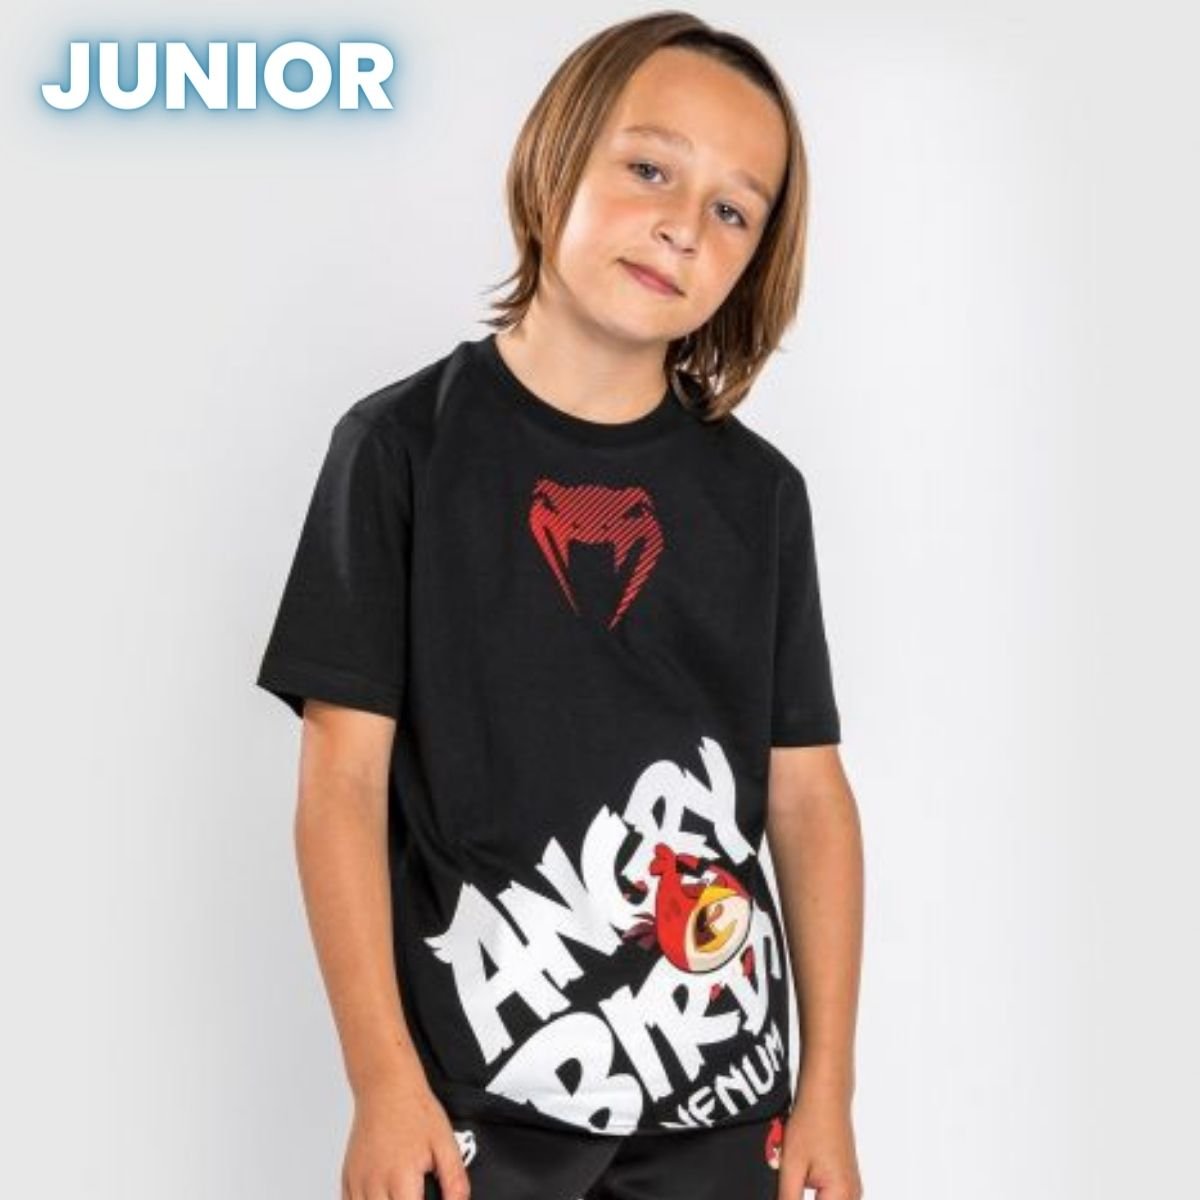 Tricou Venum Angry Birds copii | knock-out.ro